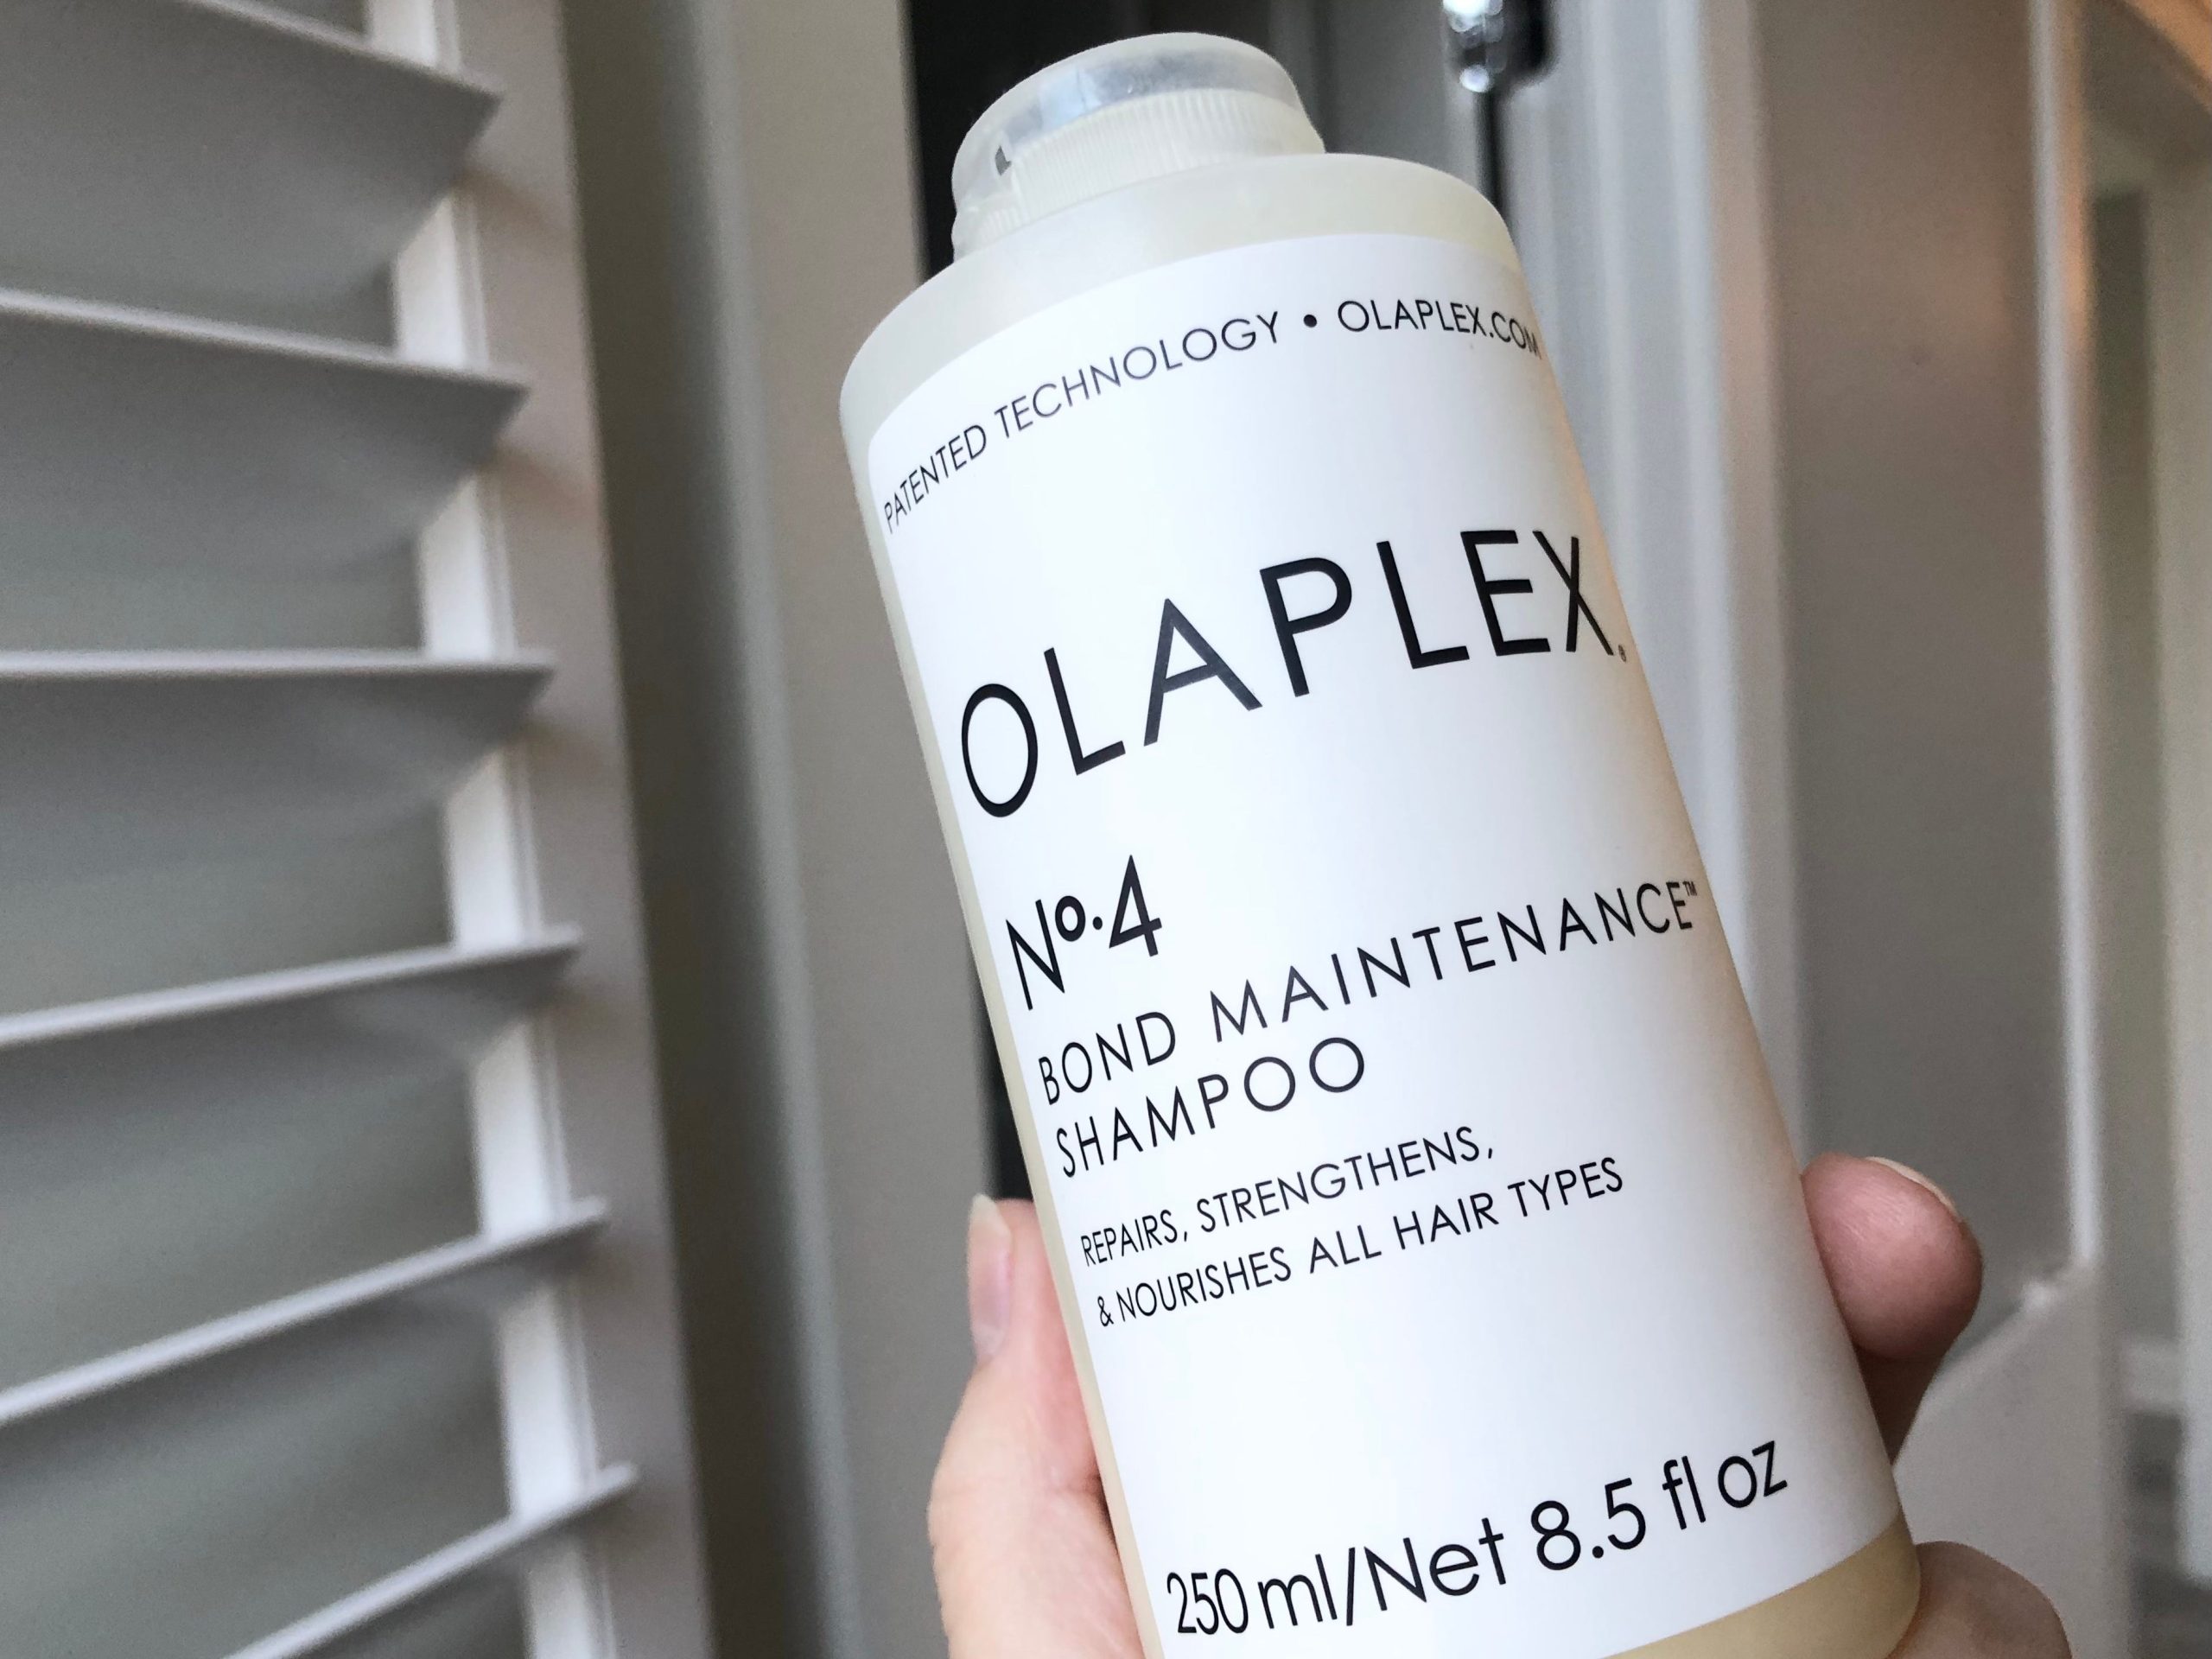 Some Olaplex customers say the company paid them refunds after they reported hair loss and breakage